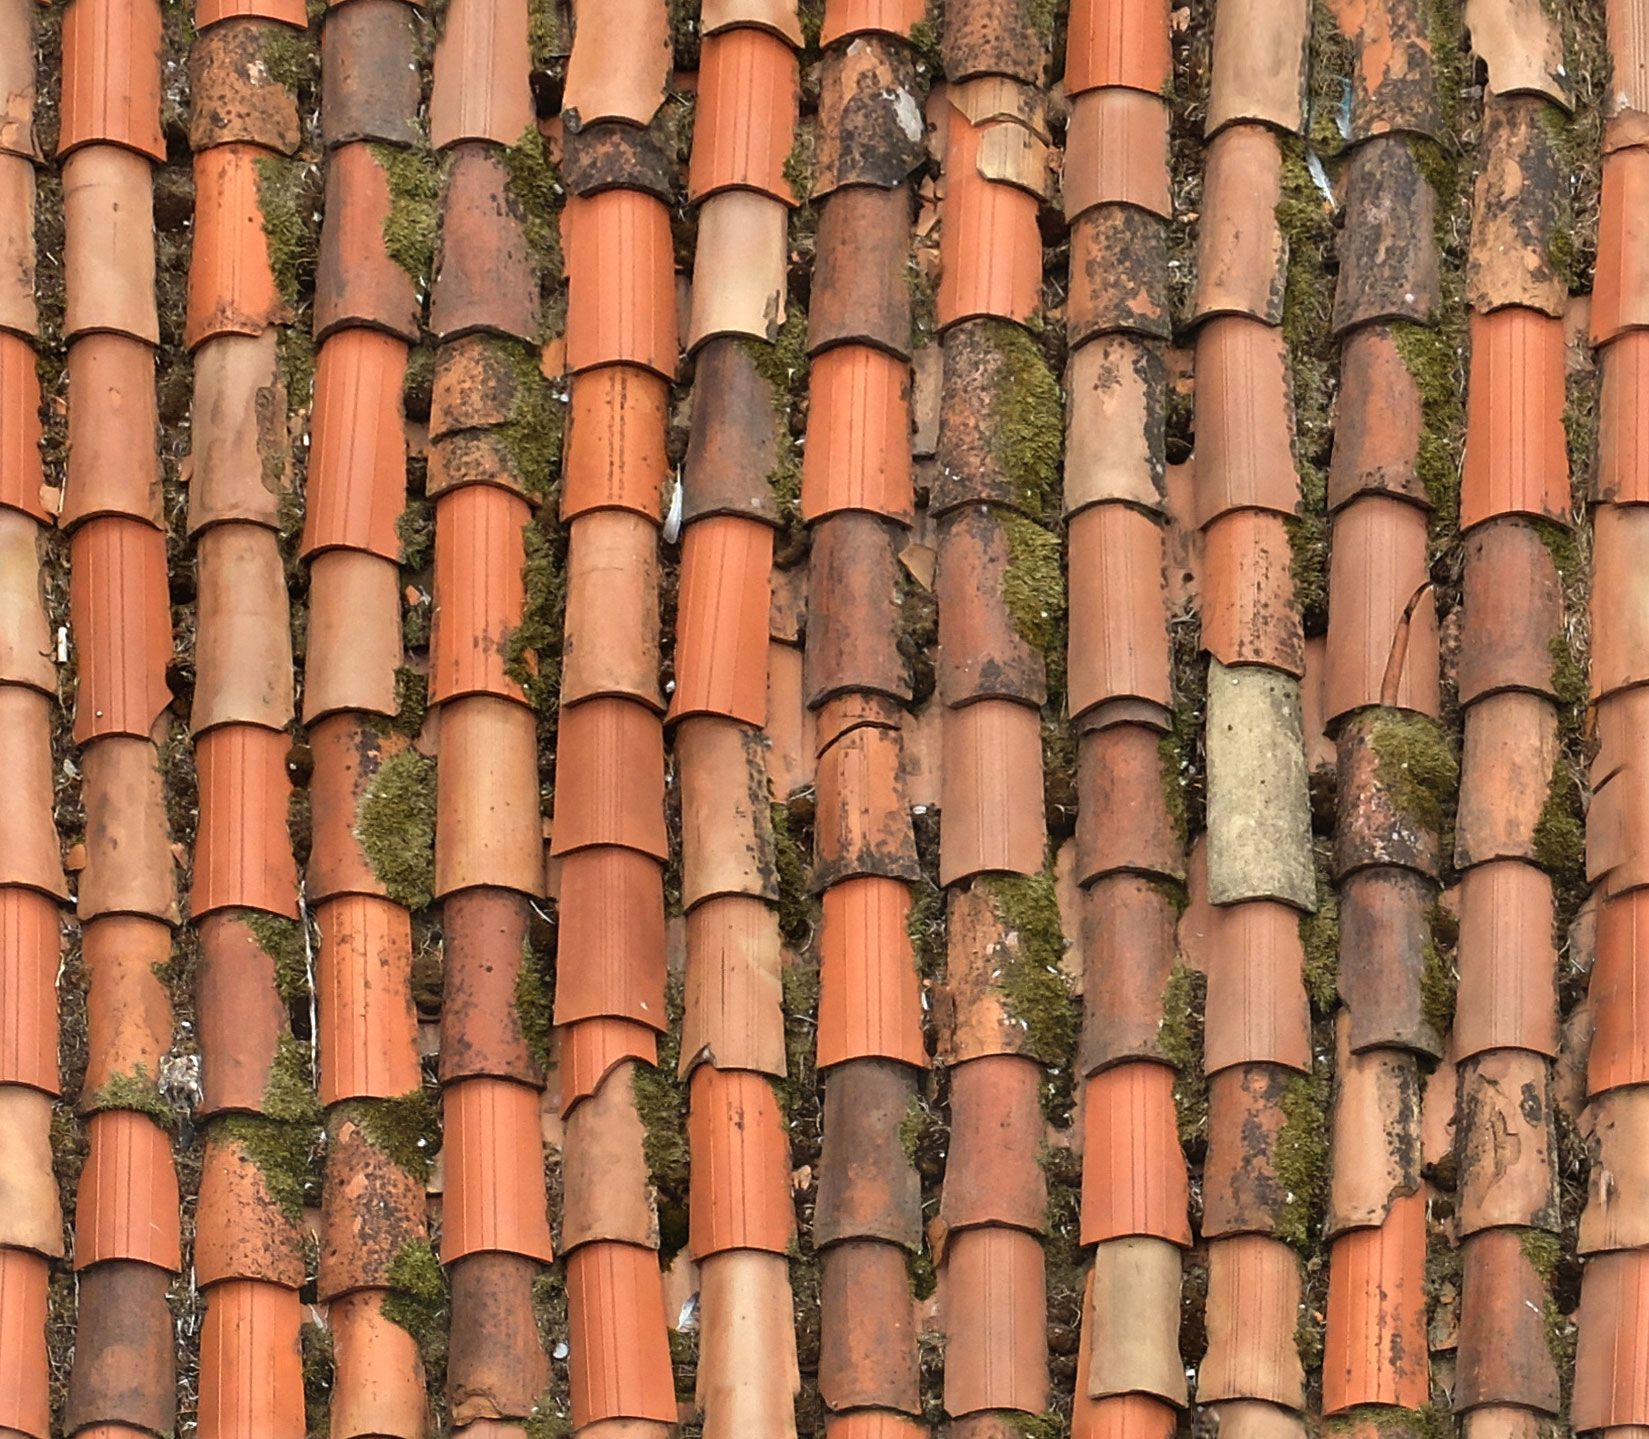 Old Roof Tiles | Architextures | арх | Pinterest | Roof tiles